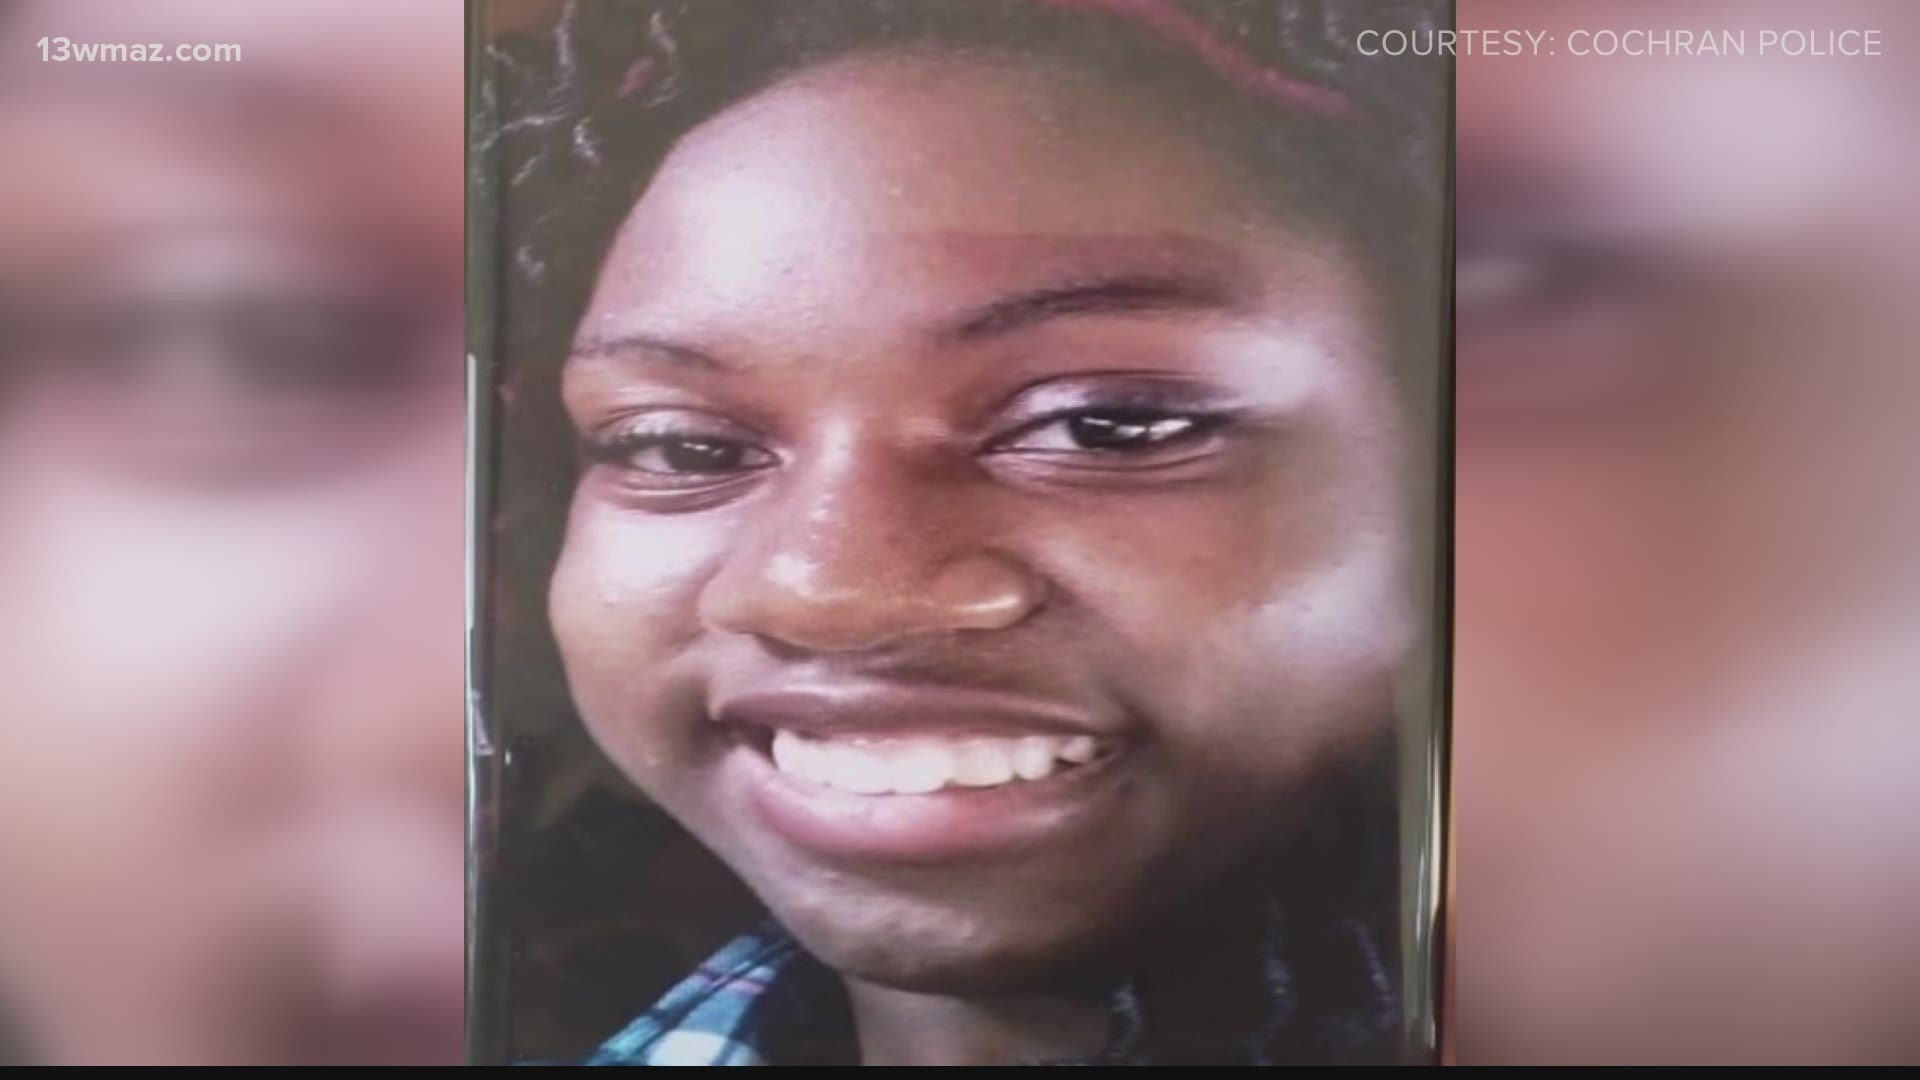 After almost four days of searching, the teen was found safe in Illinois